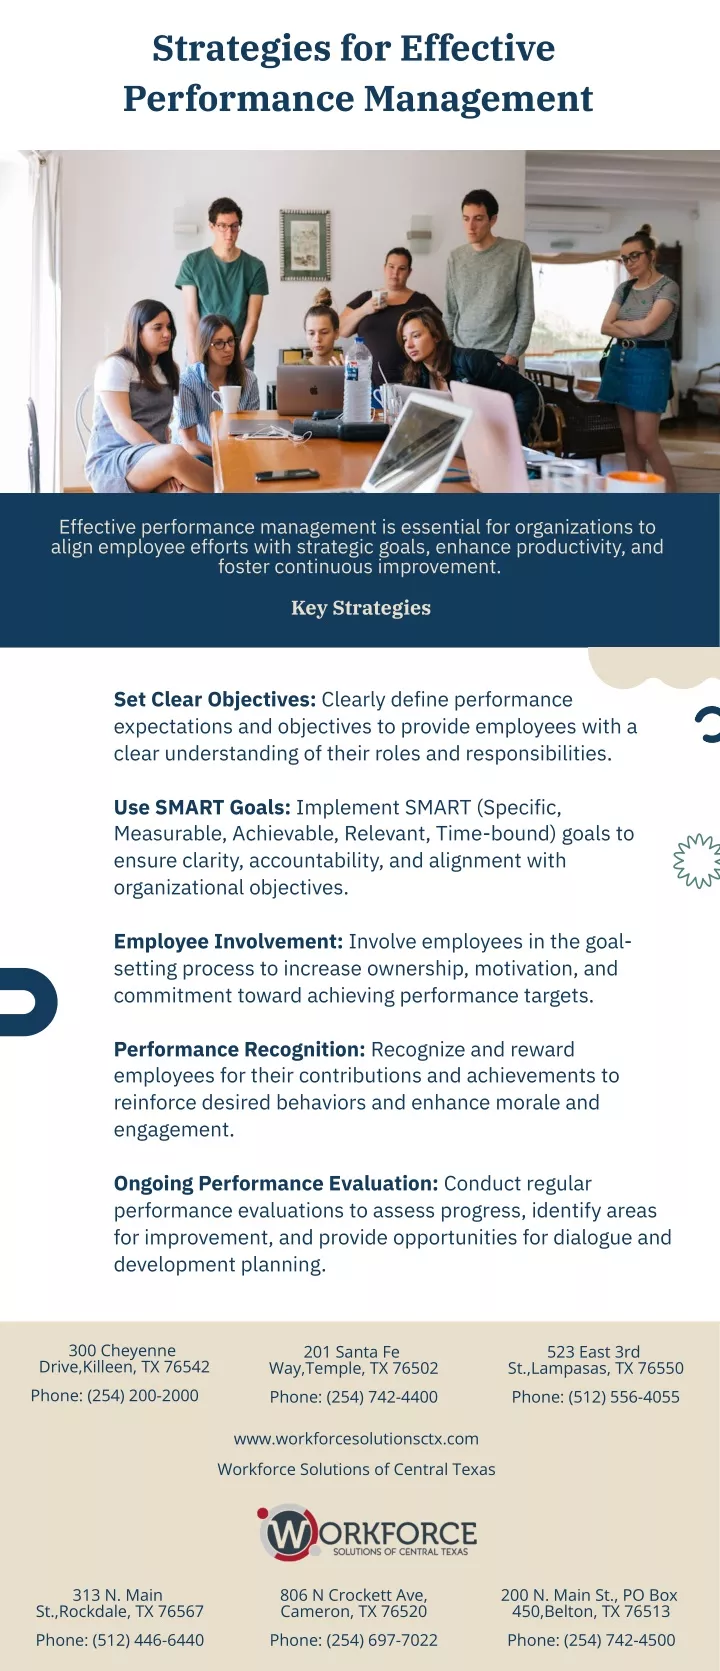 strategies for effective performance management